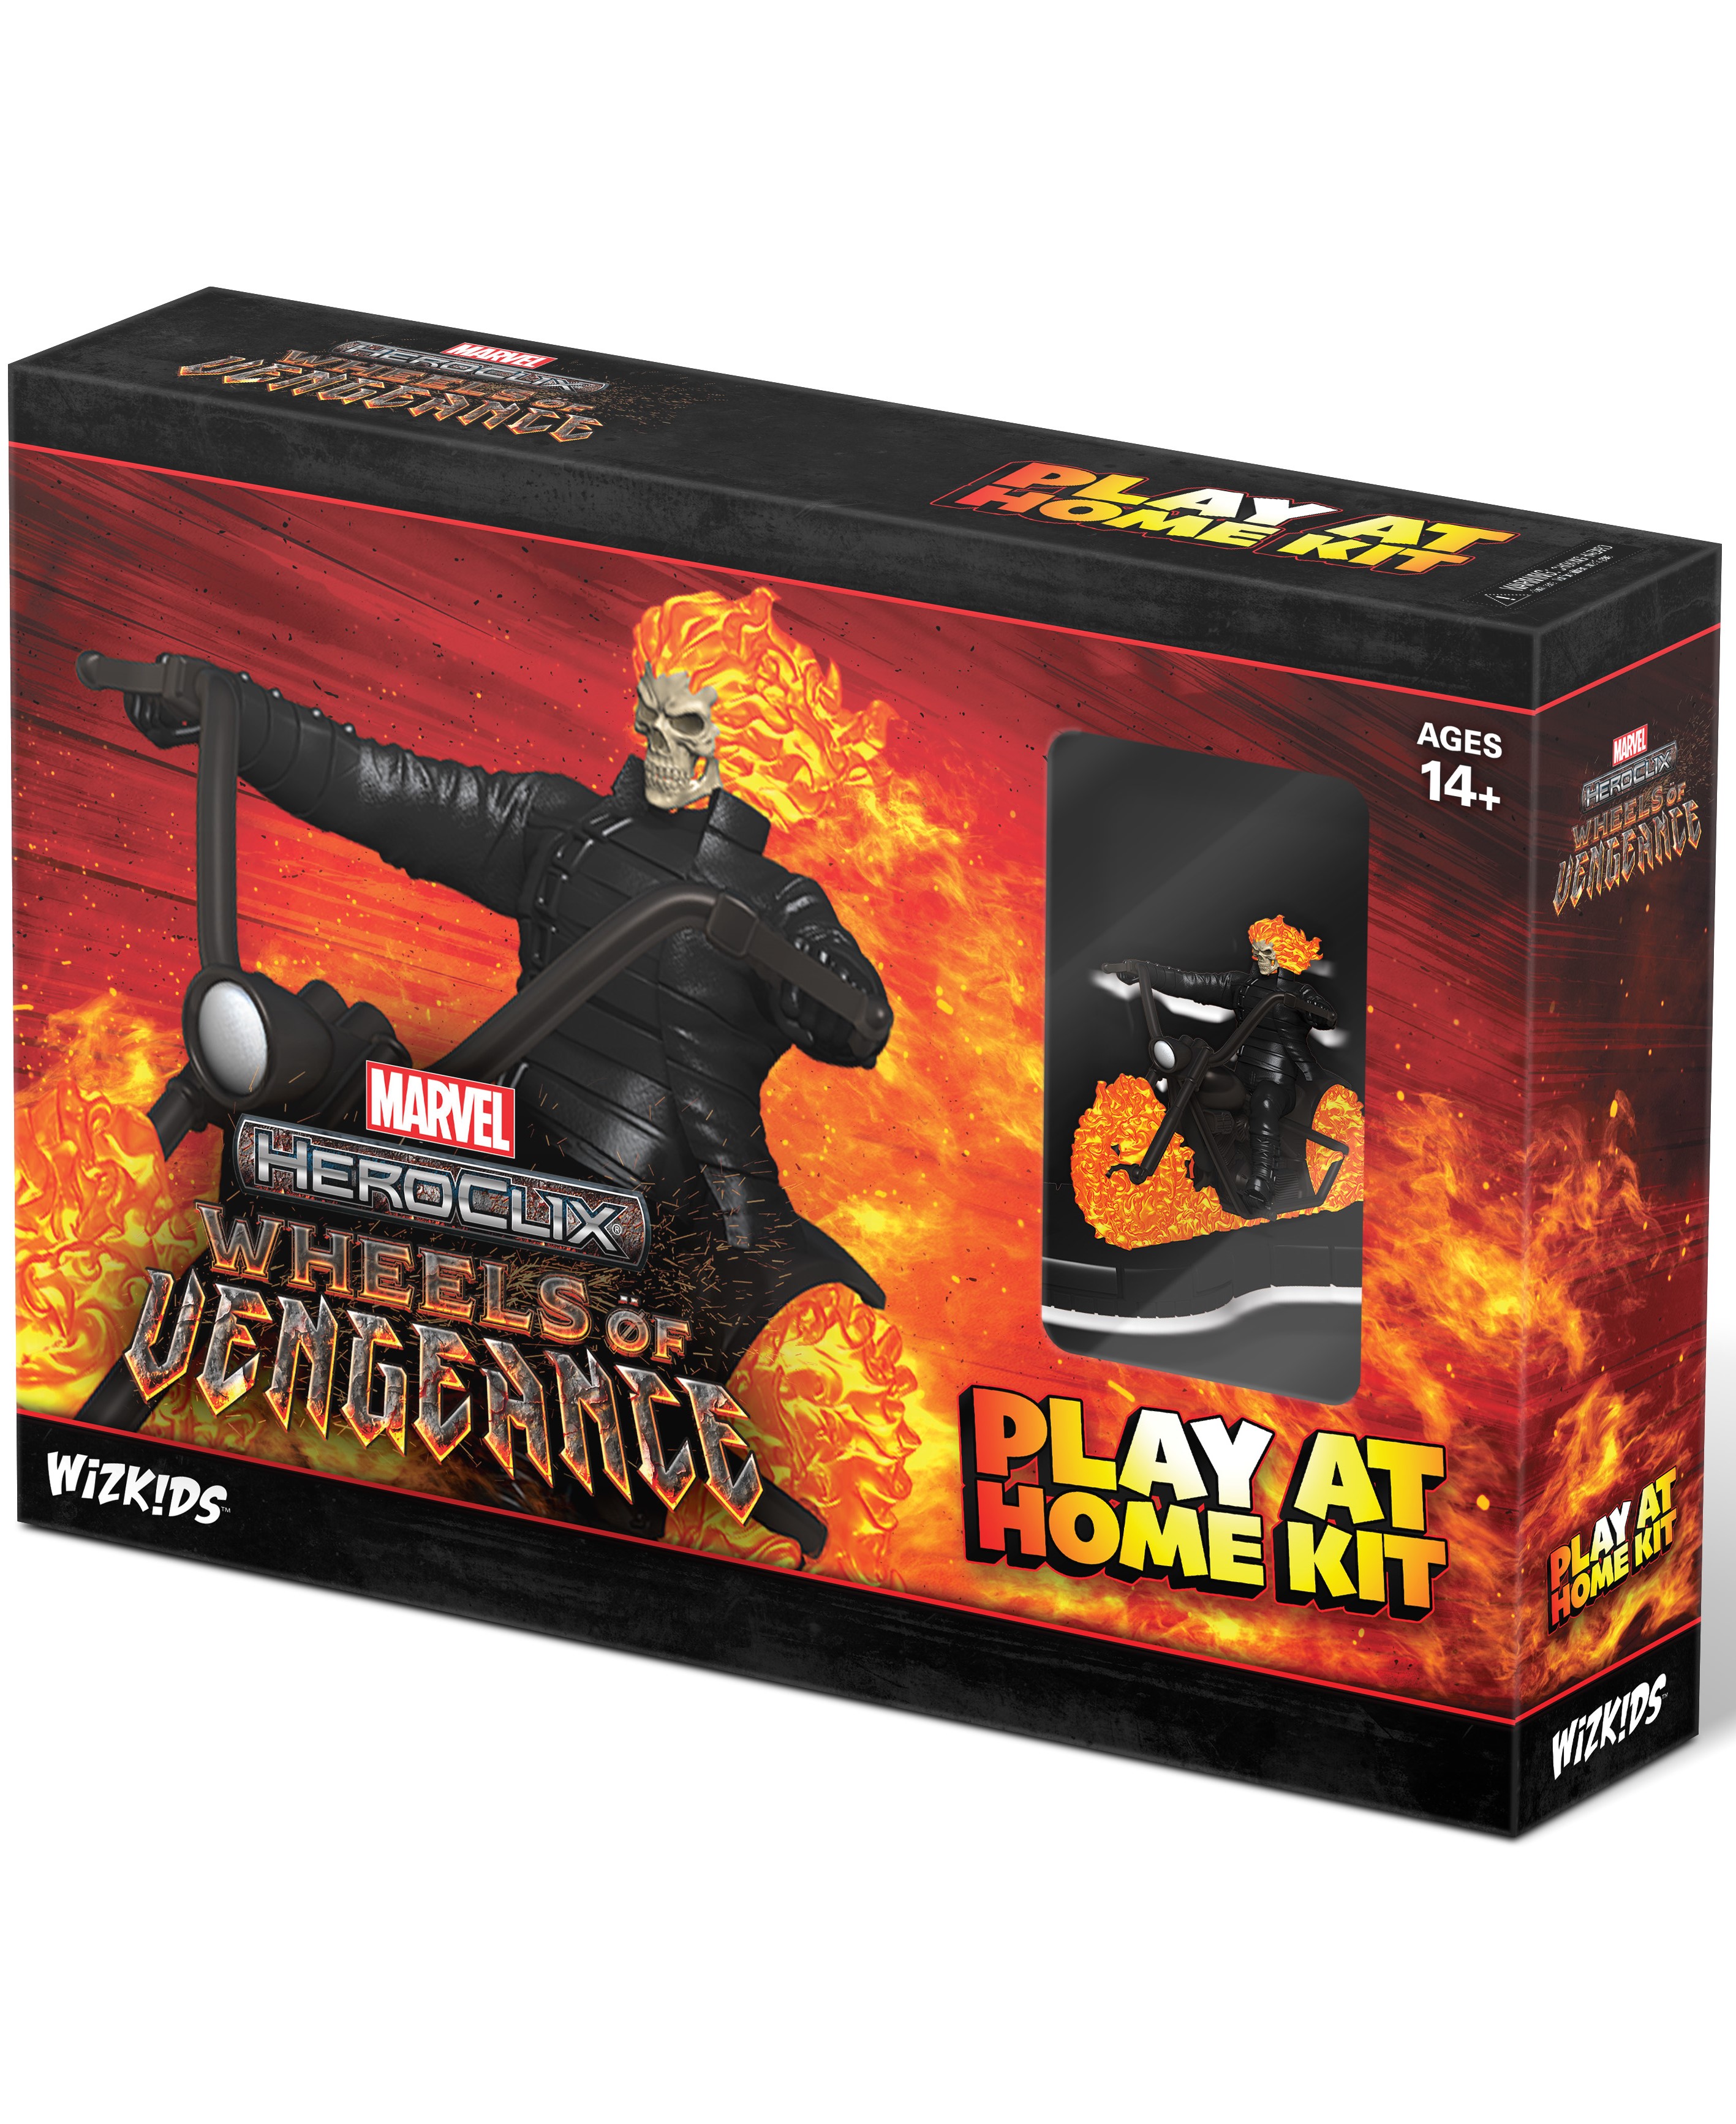 Marvel Heroclix Wheels of Vengeance Play At Home Kit